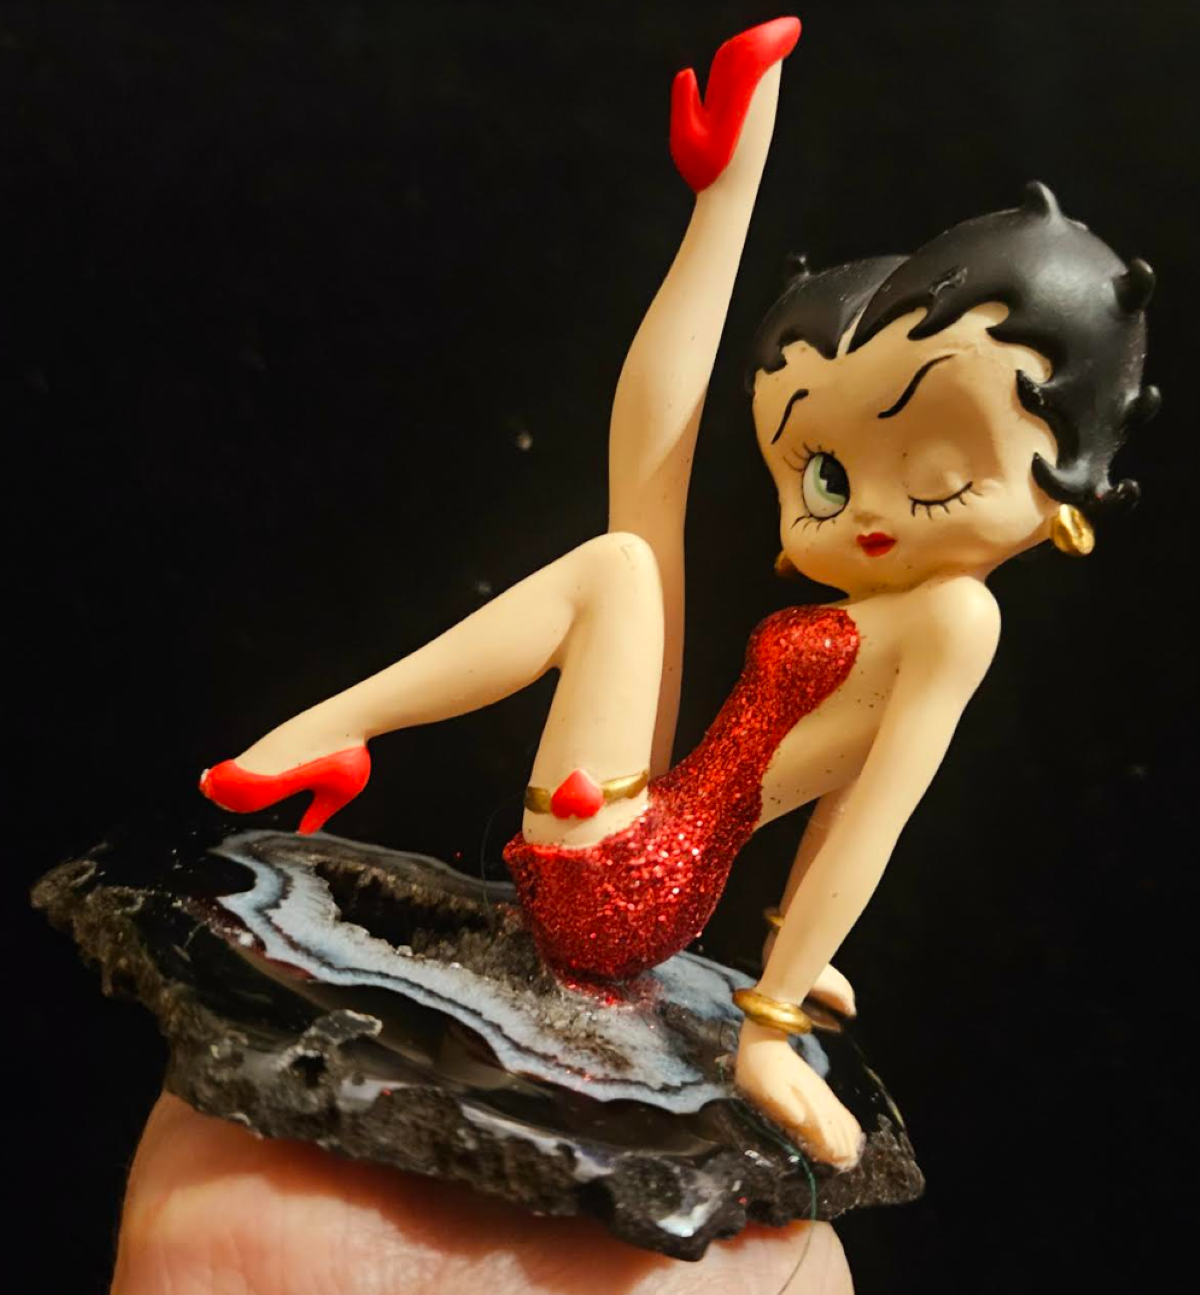 Betty Boop Strike a Pose Adjustable Hand Ring - Whimsical Femme Fatale Doll Statement Ring -  Avant Garde Female Cartoon Figurine Finger Candy - Kat Kouture Jewelry